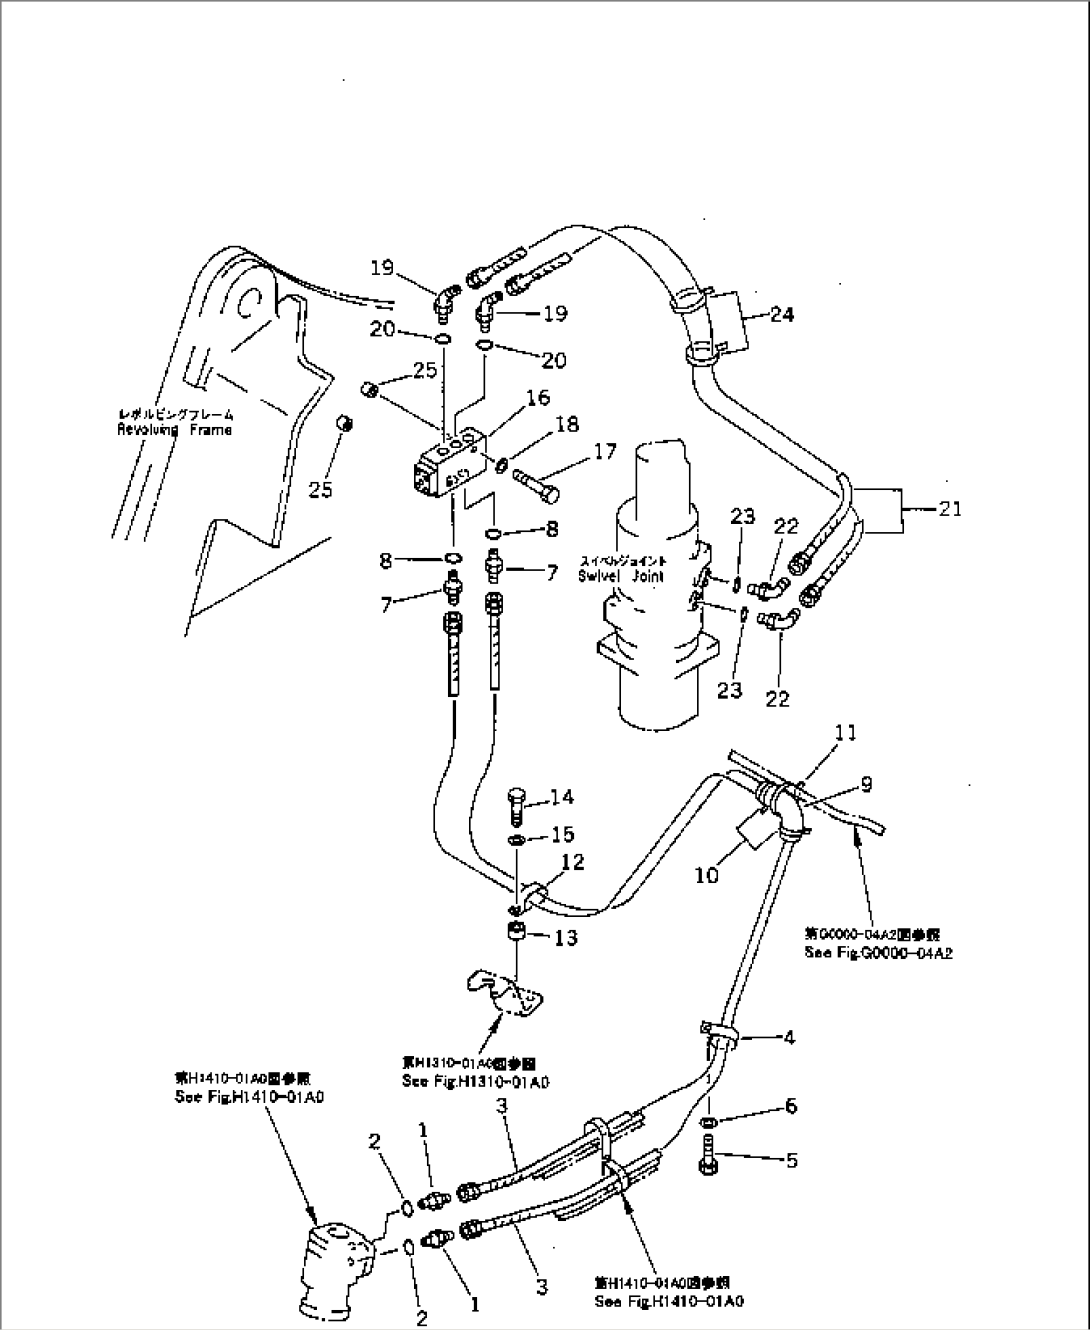 STEERING PIPING (VALVE TO/FROM SWIVEL JOINT) (FOR STEERING AUTO- SELECT)